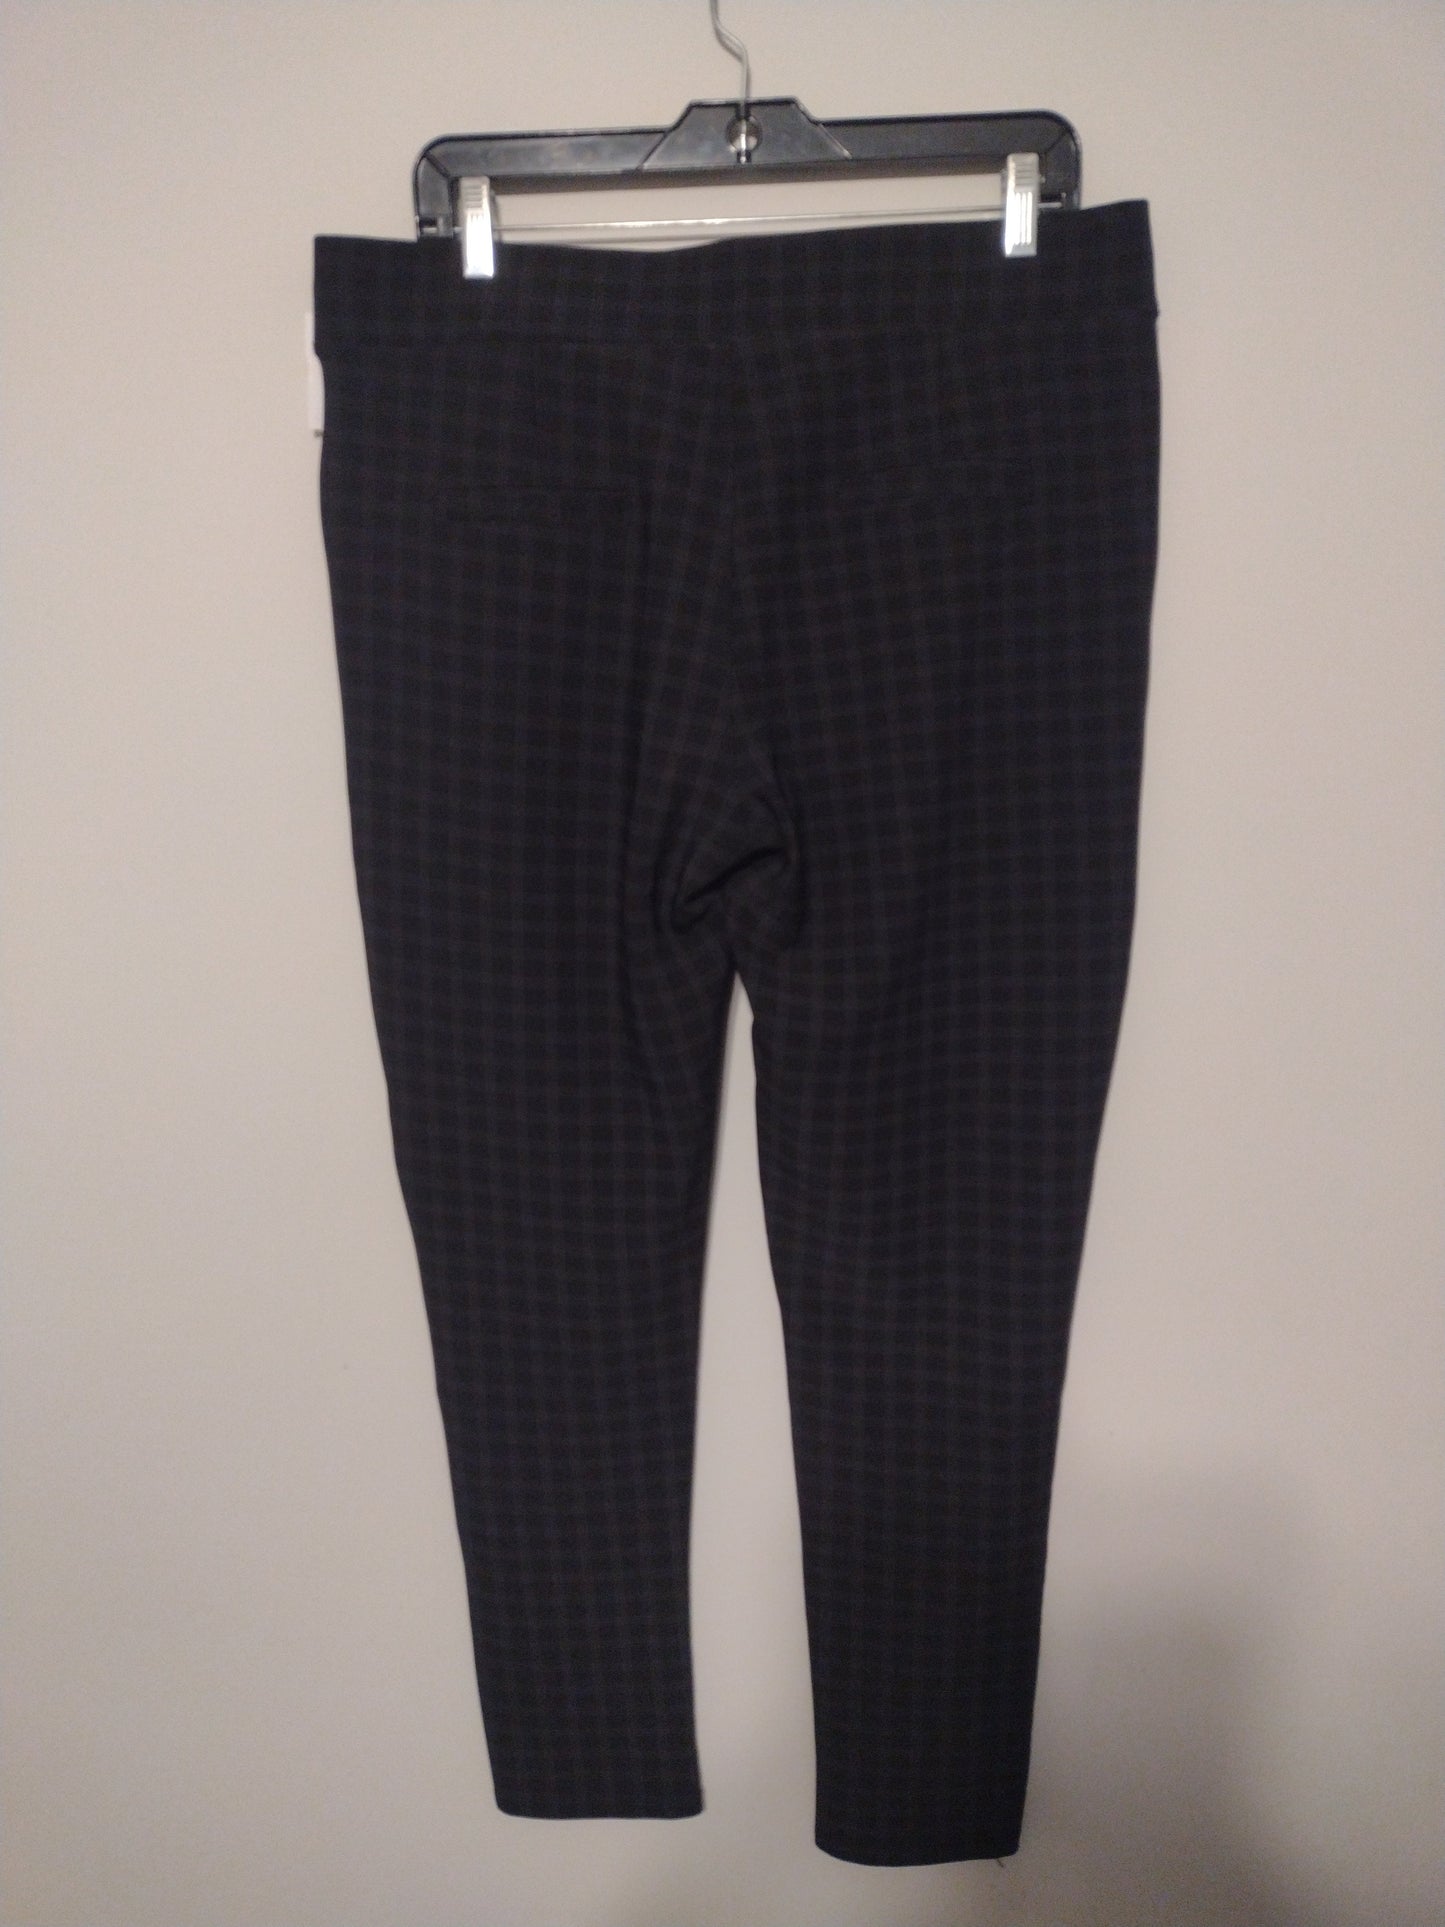 Pants Ankle By Clothes Mentor  Size: 2x